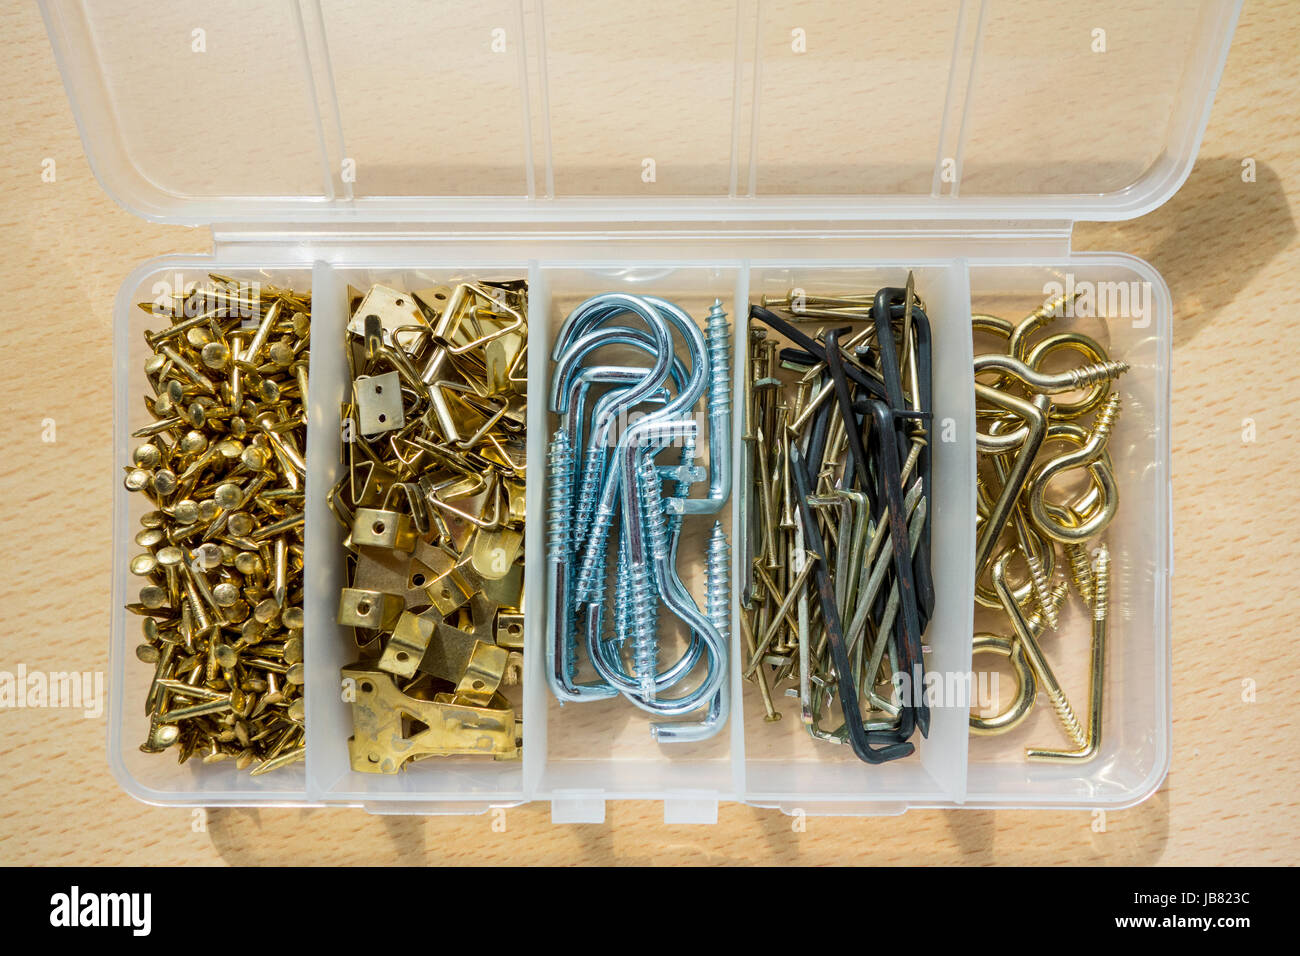 A handyman's box of assorted picture-hanging pins and hooks Stock Photo